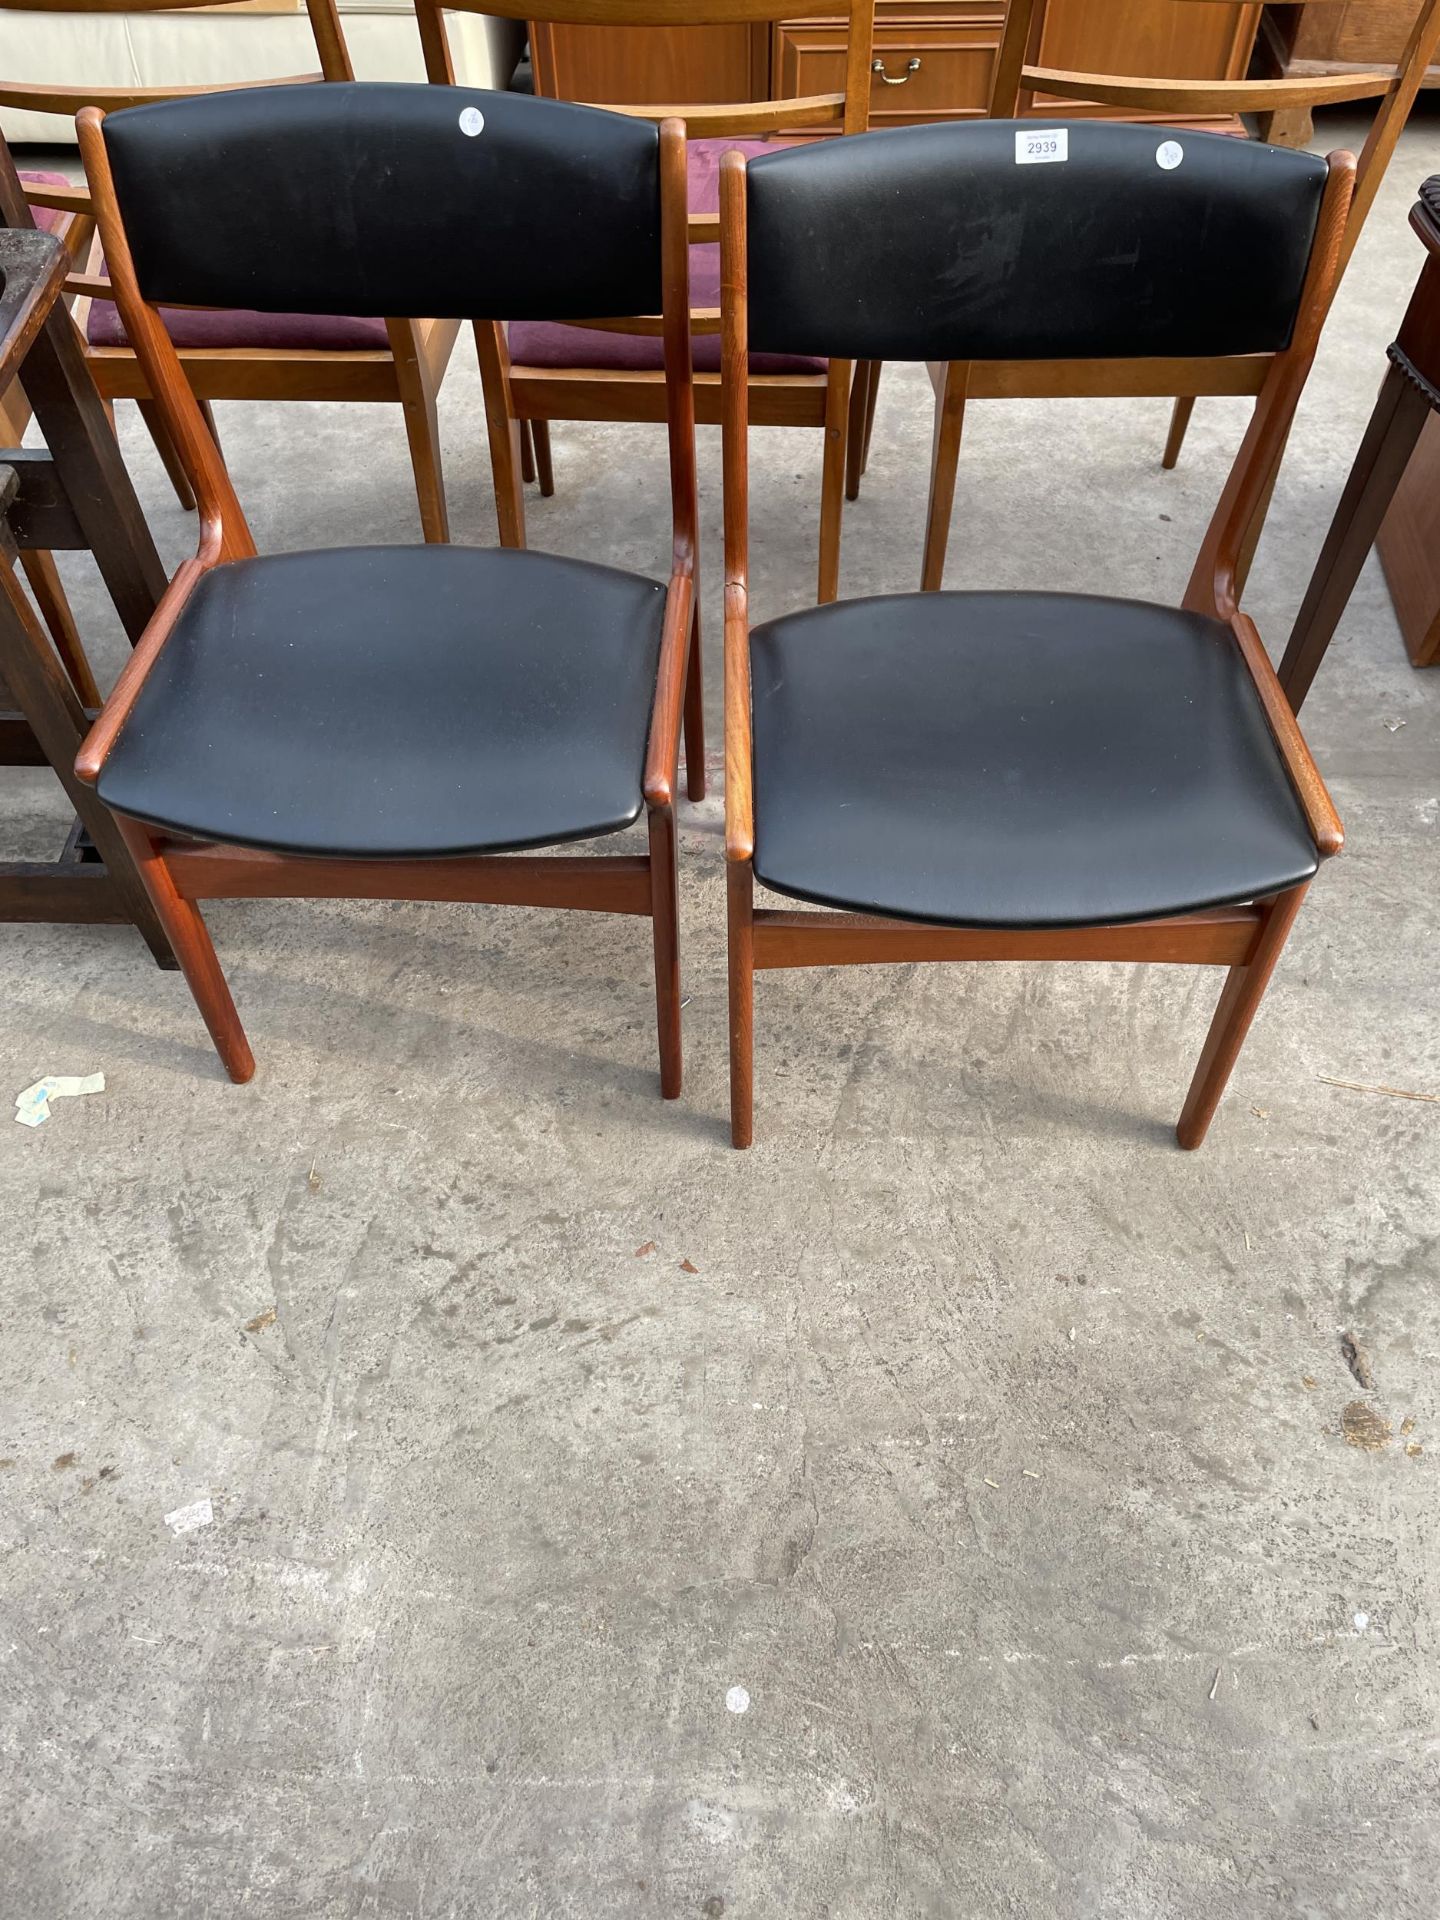 A PAIR OF DYRLUND (DENMARK) RETRO TEAK DINING CHAIRS WITH BLACK FAUX LEATHER SEATS AND BACKS